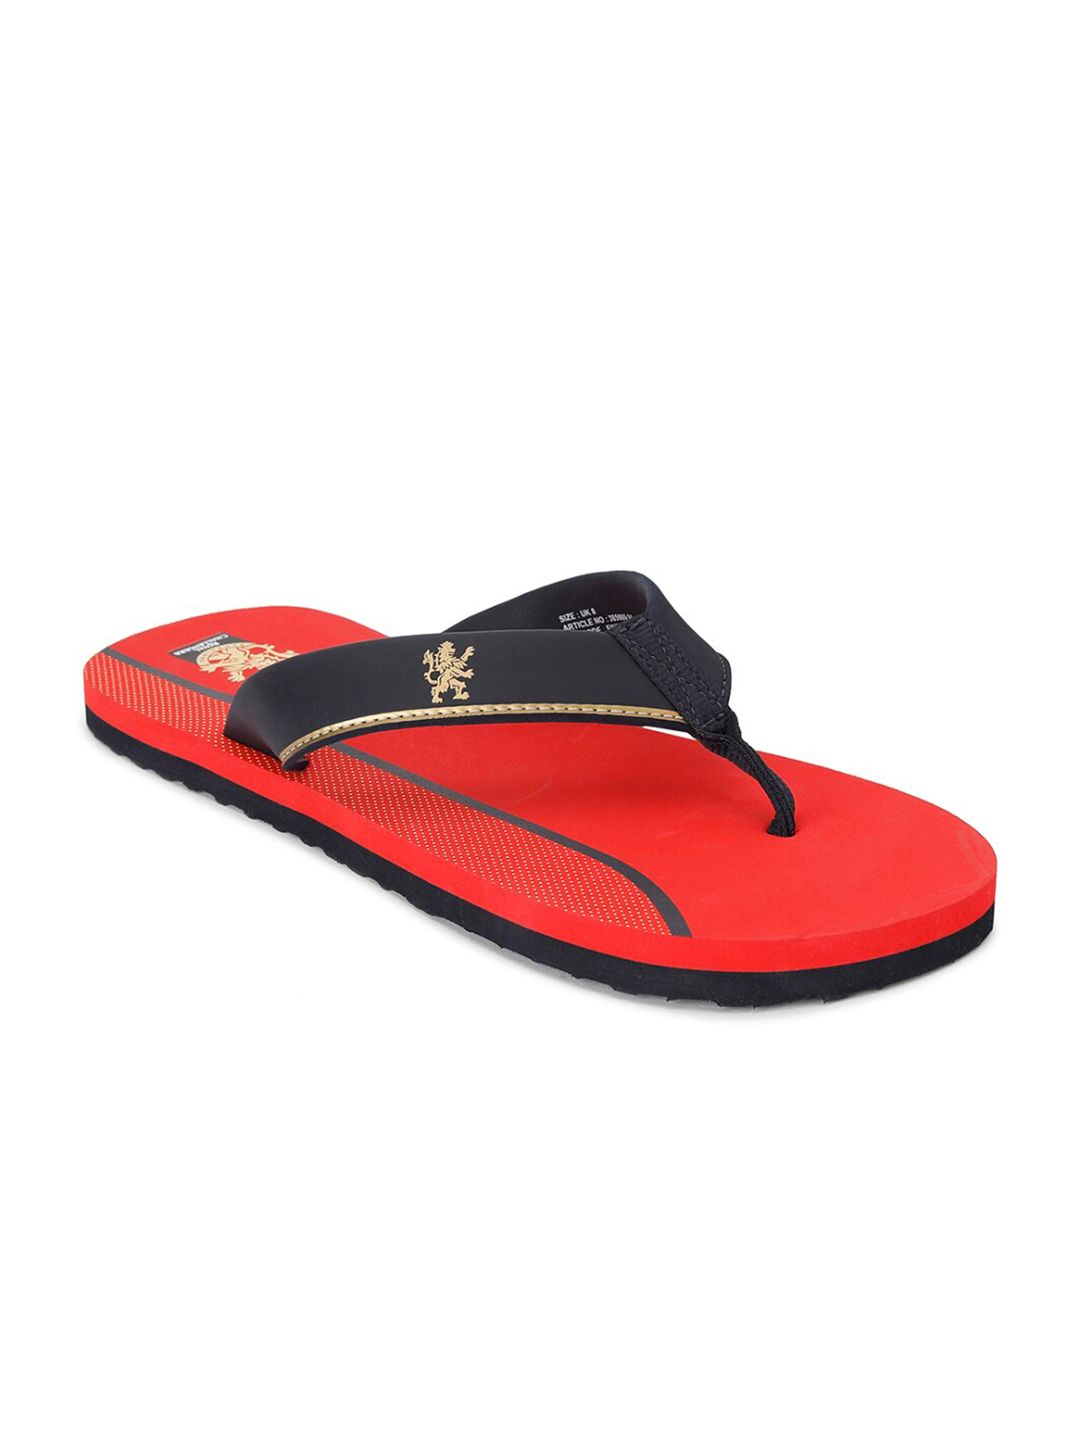 Puma Unisex Navy Blue & Red Printed Thong Flip-Flops Price in India